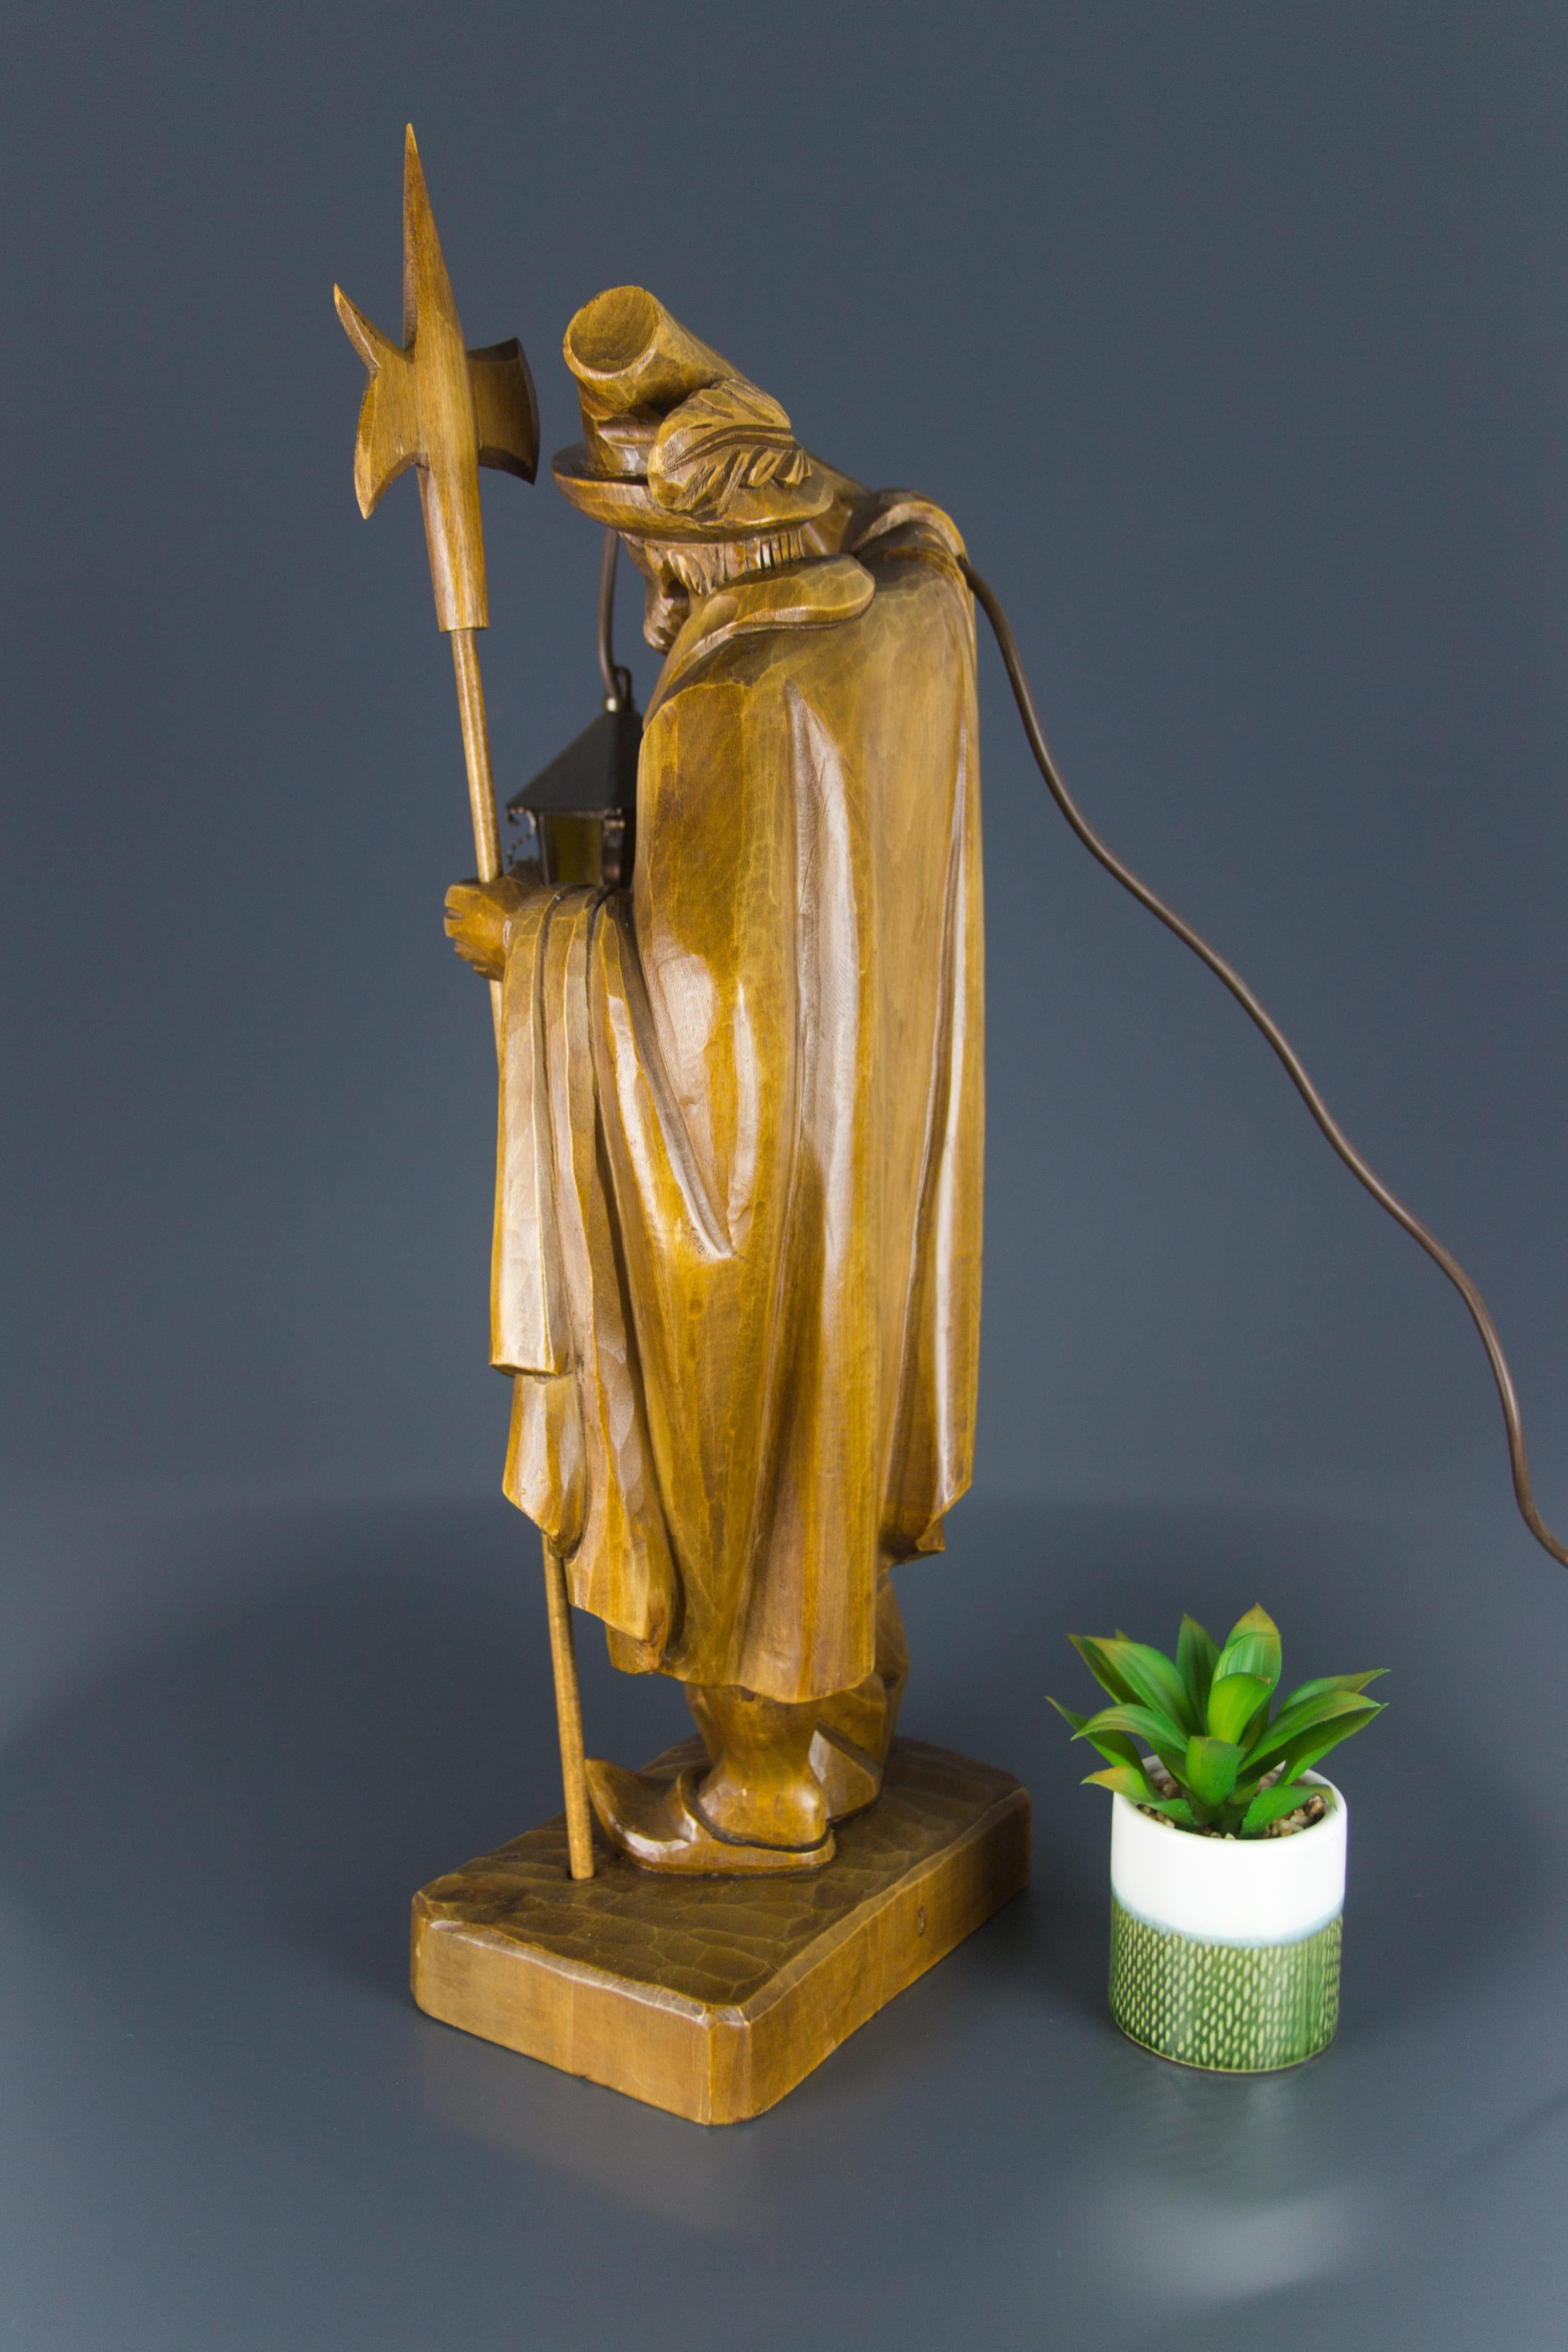 20th Century German Hand Carved Wooden Figurative Sculpture Lamp Night Watchman with Lantern